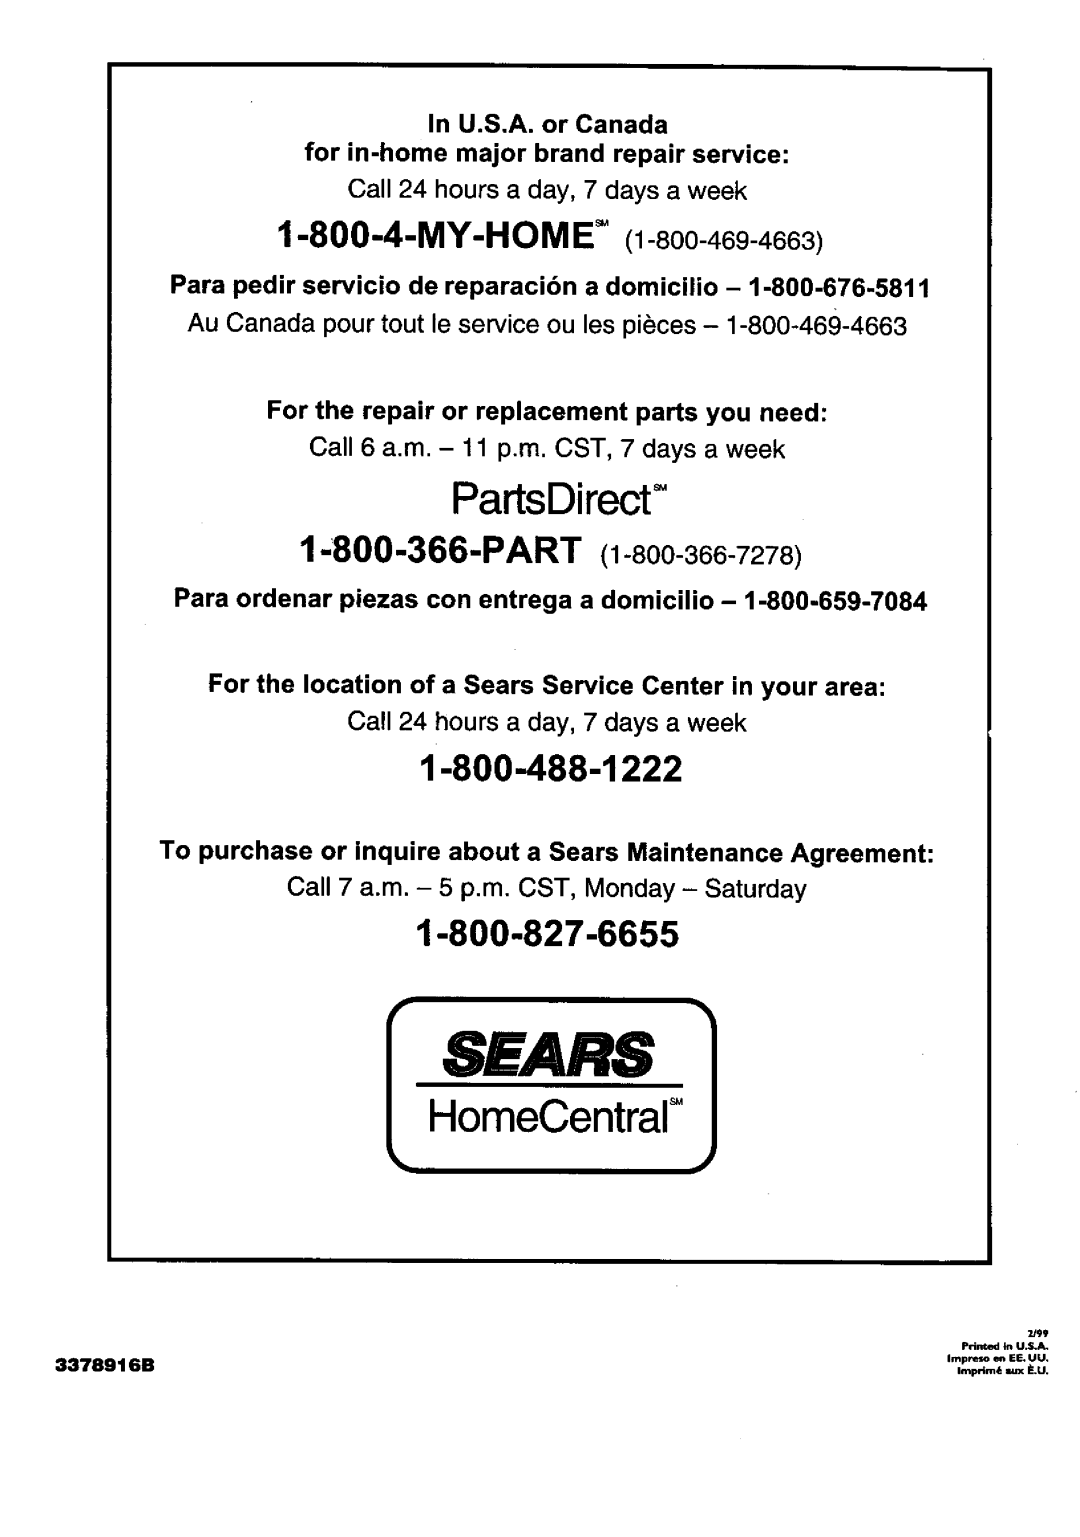 Kenmore 15592, 15595 PartsDirect, For the repair or replacement parts you need, Call 6 a.m. - 11 p.m. CST, 7 days a week 